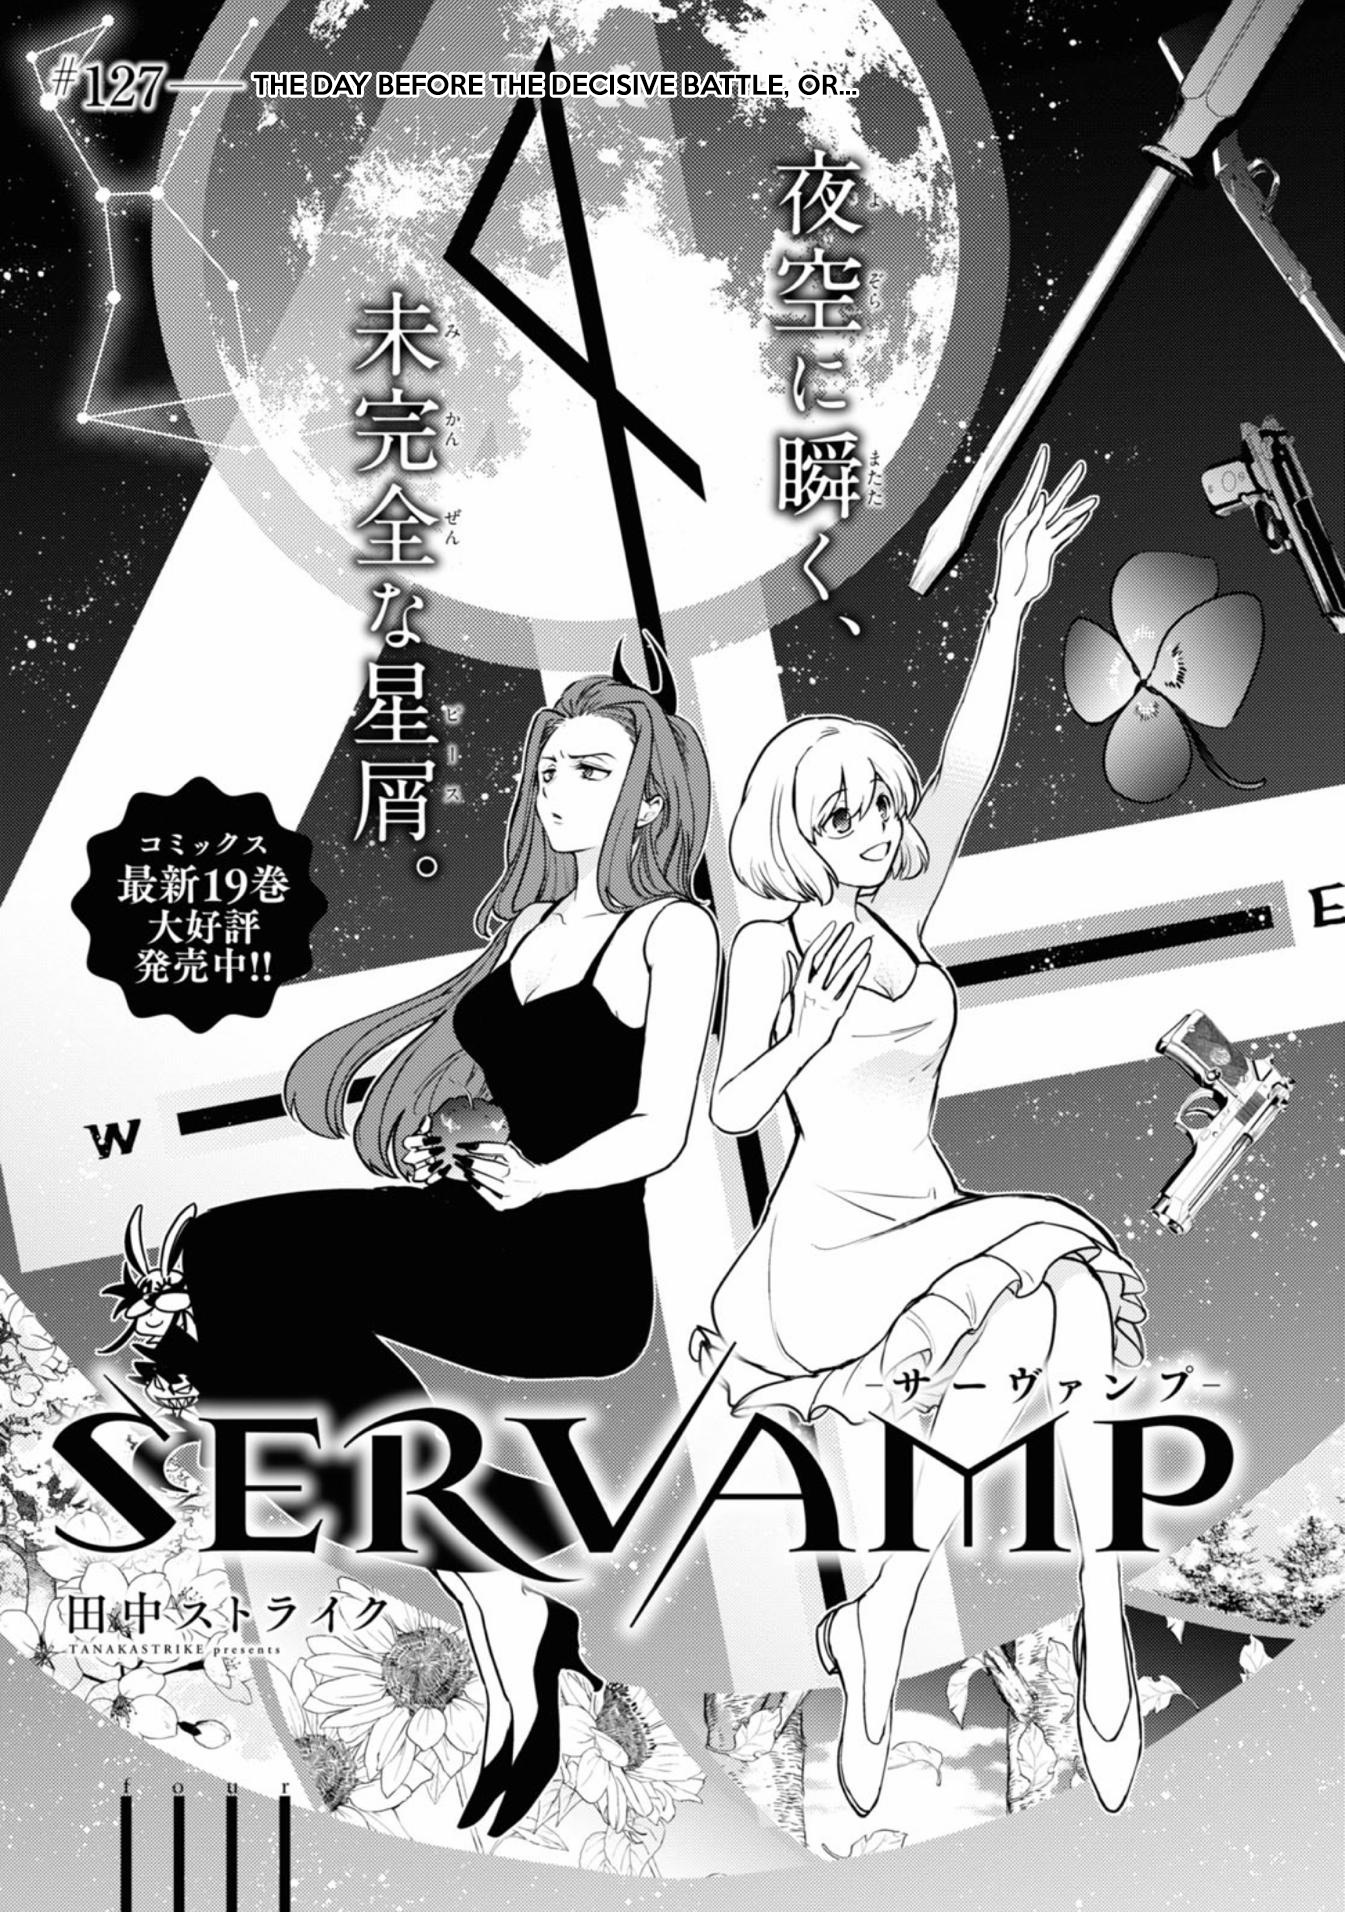 Servamp Chapter 127: The Day Before The Decisive Battle, Or... - Picture 1